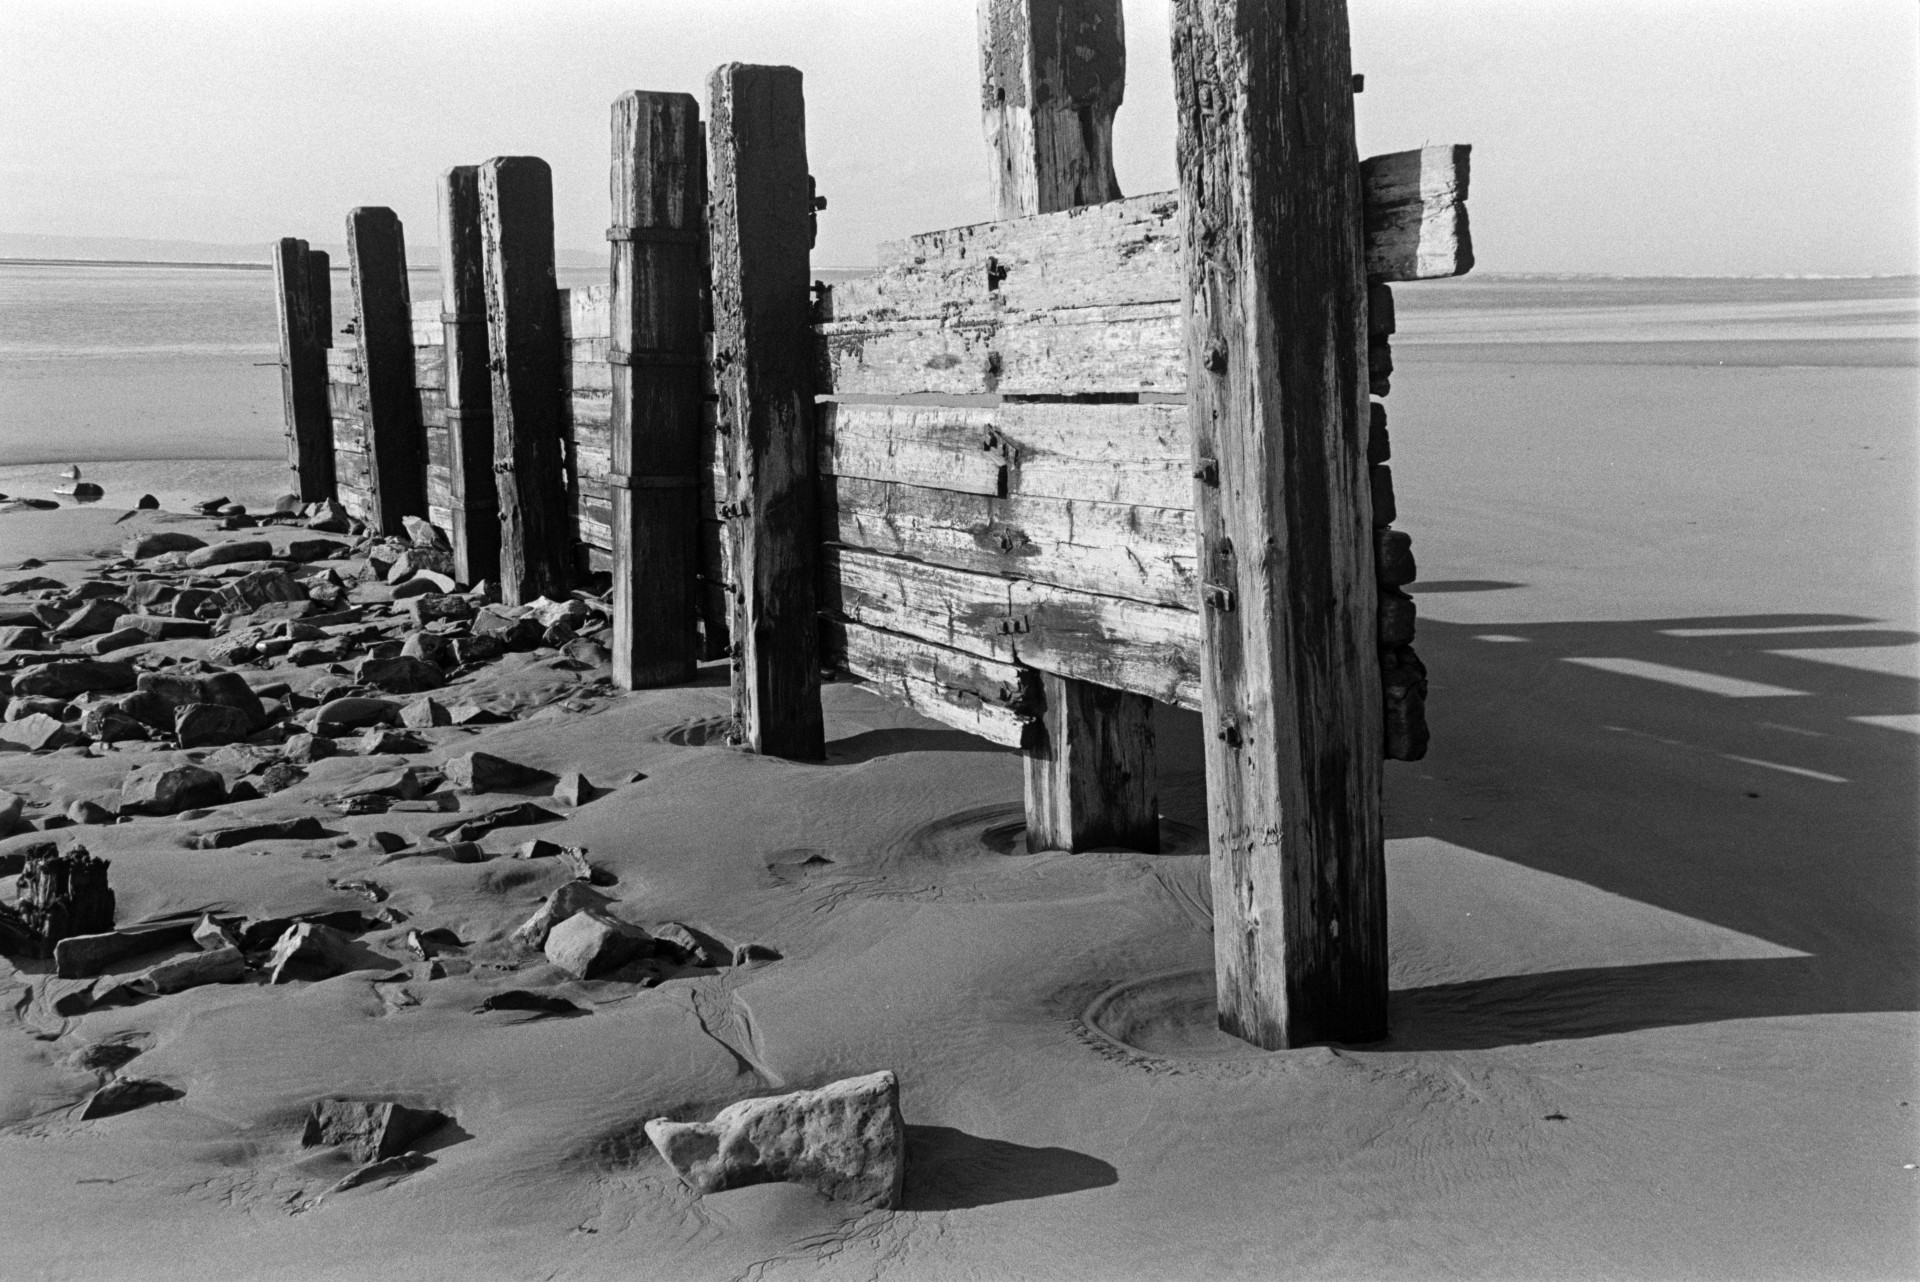 A wooden groyne on the beach at Saunton Sands. Small rocks have washed up against the groyne. The sea is visible in the background.